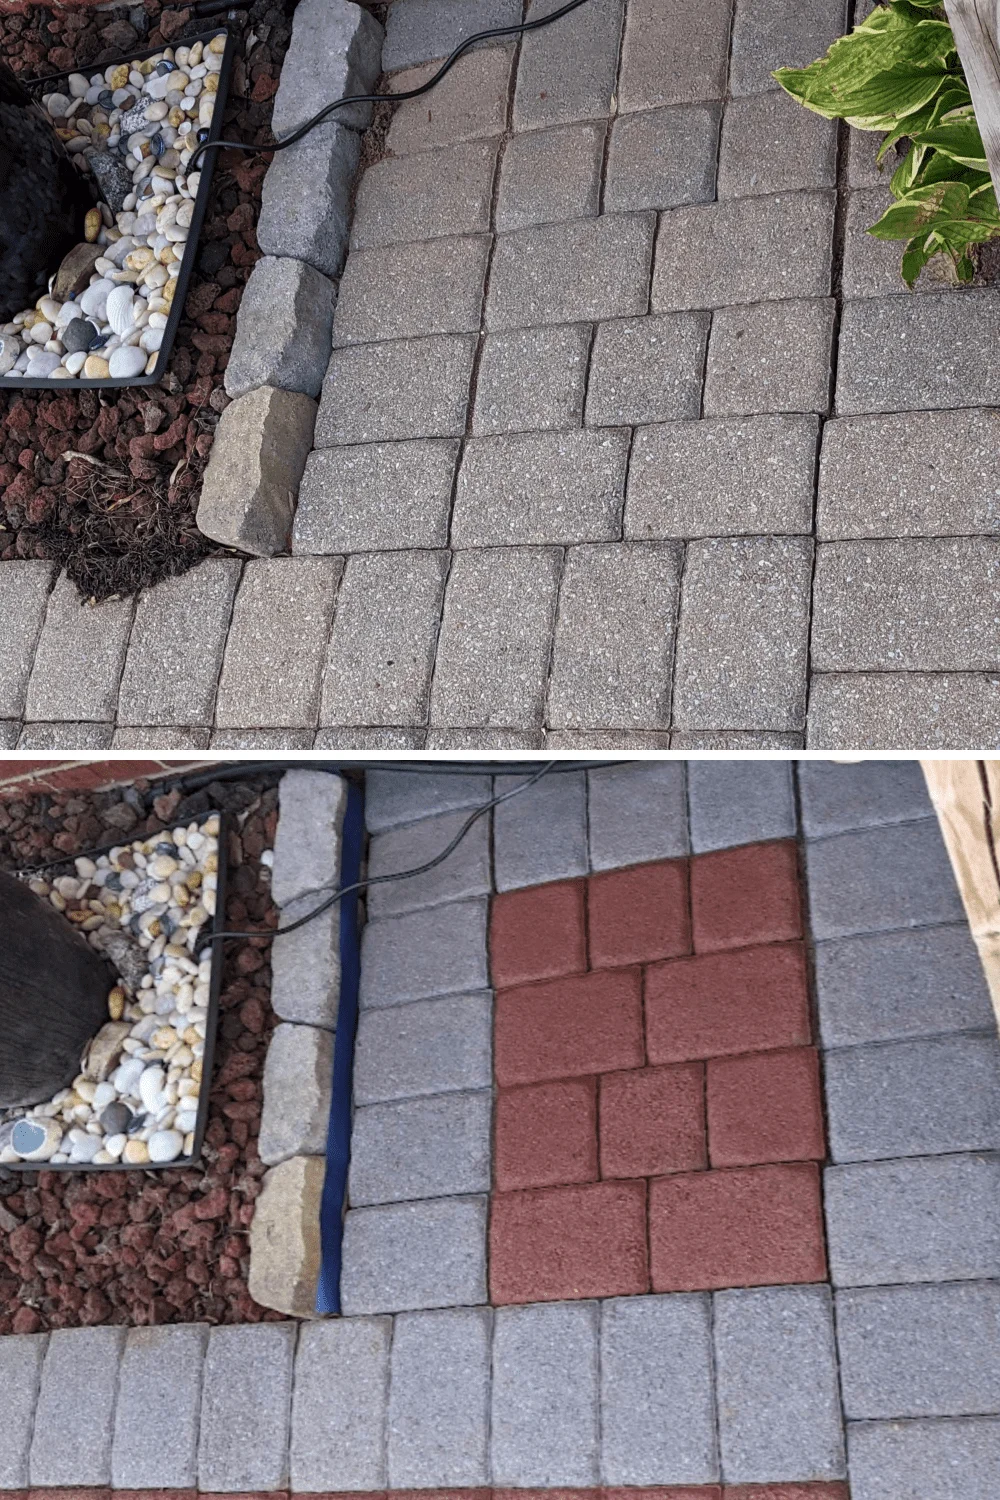 Two photos: first, pavers look old and colorless. Second, those pavers are now vivid crimson red and silver gray